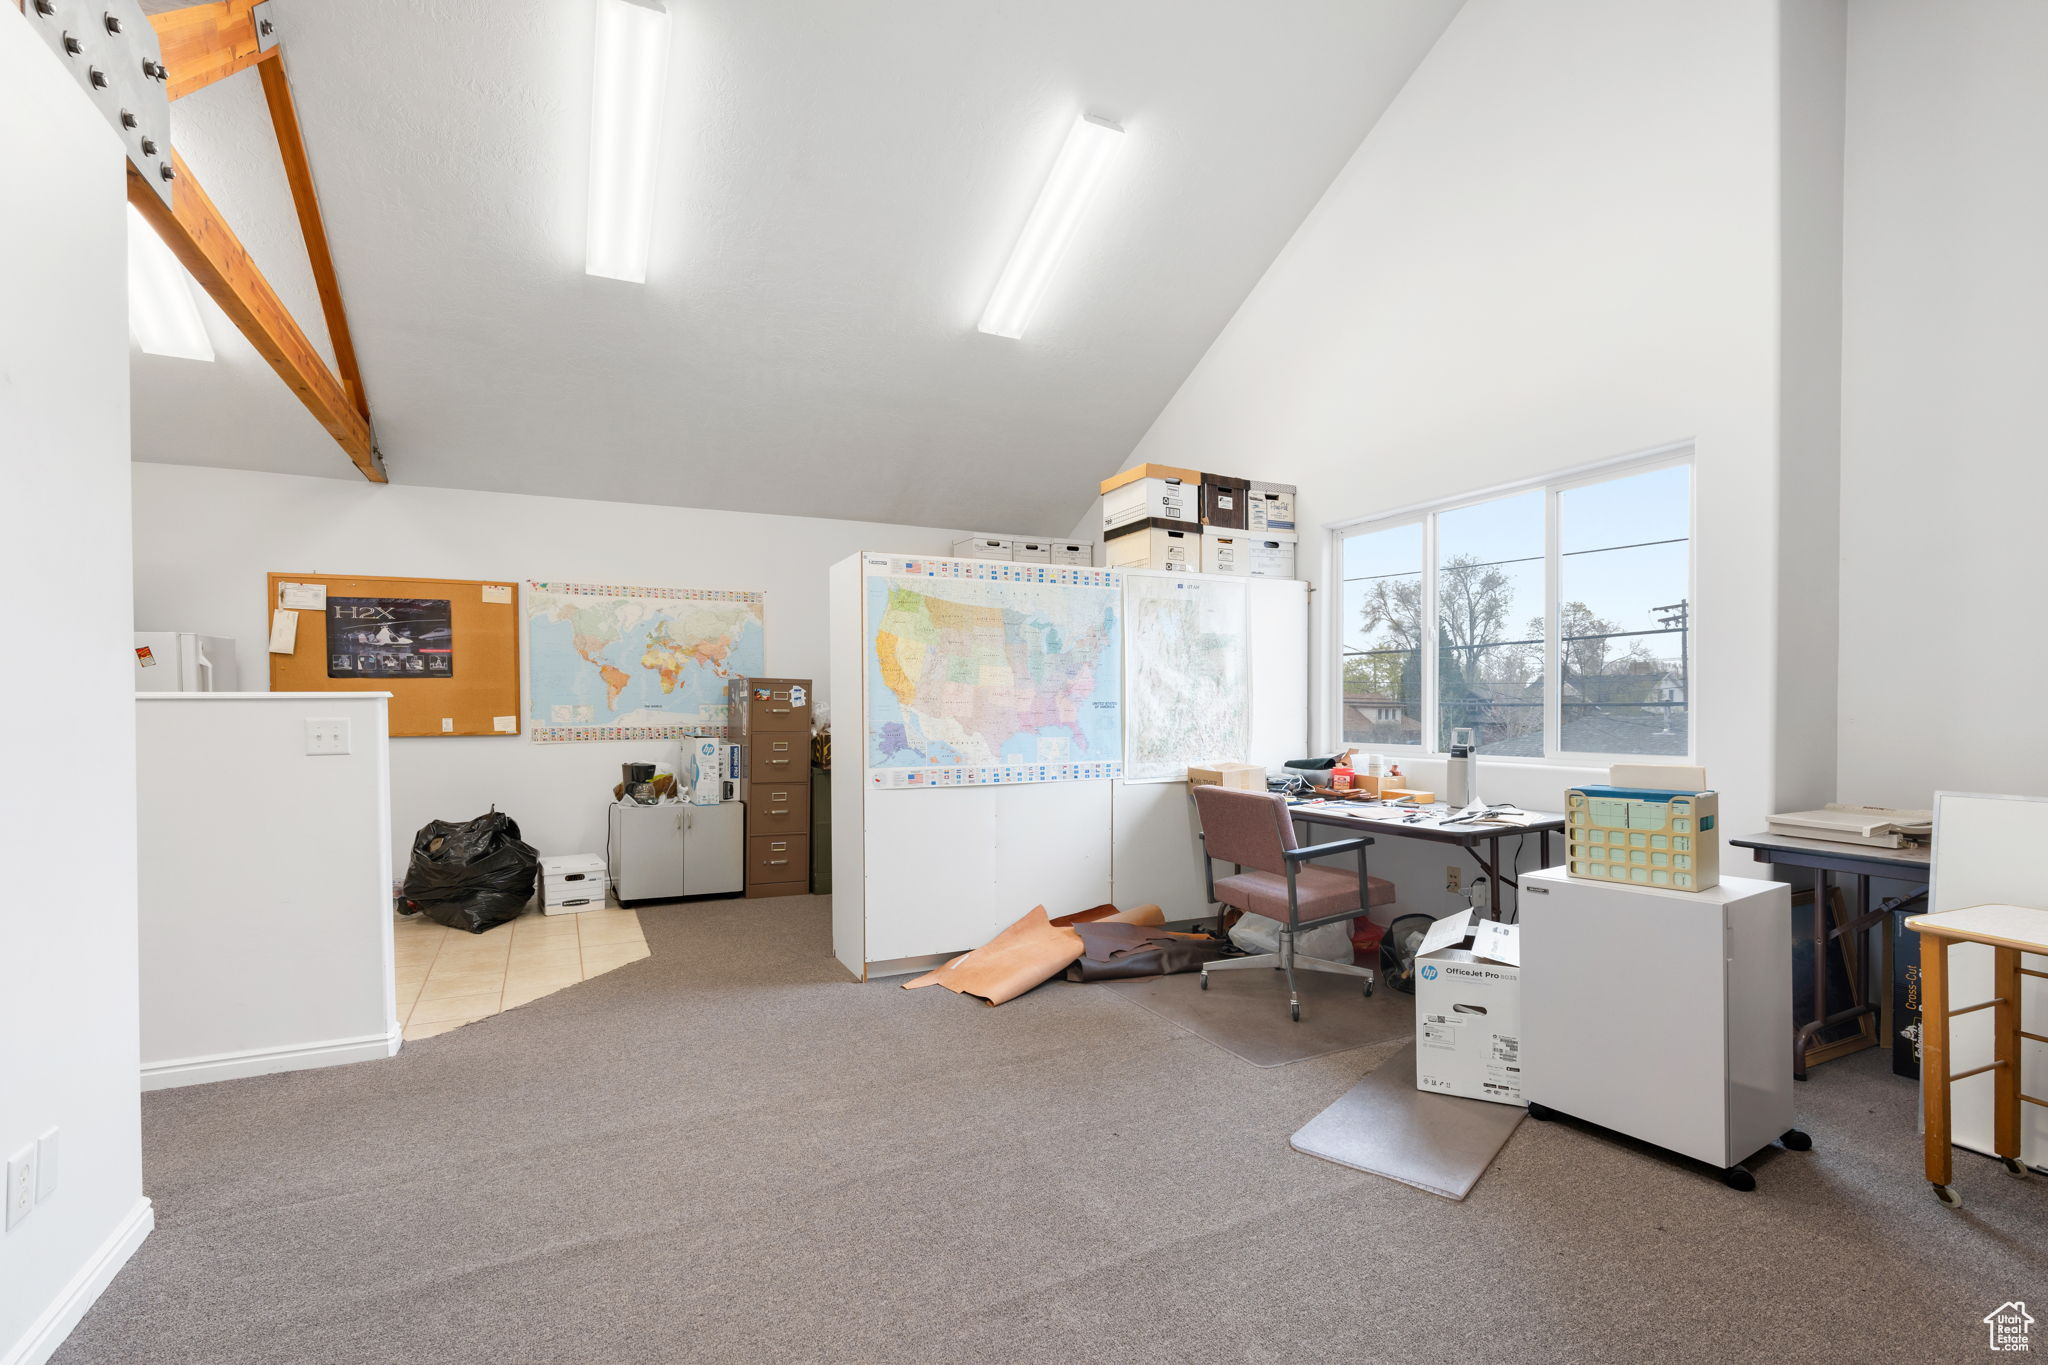 Office with beamed ceiling, high vaulted ceiling, and carpet floors